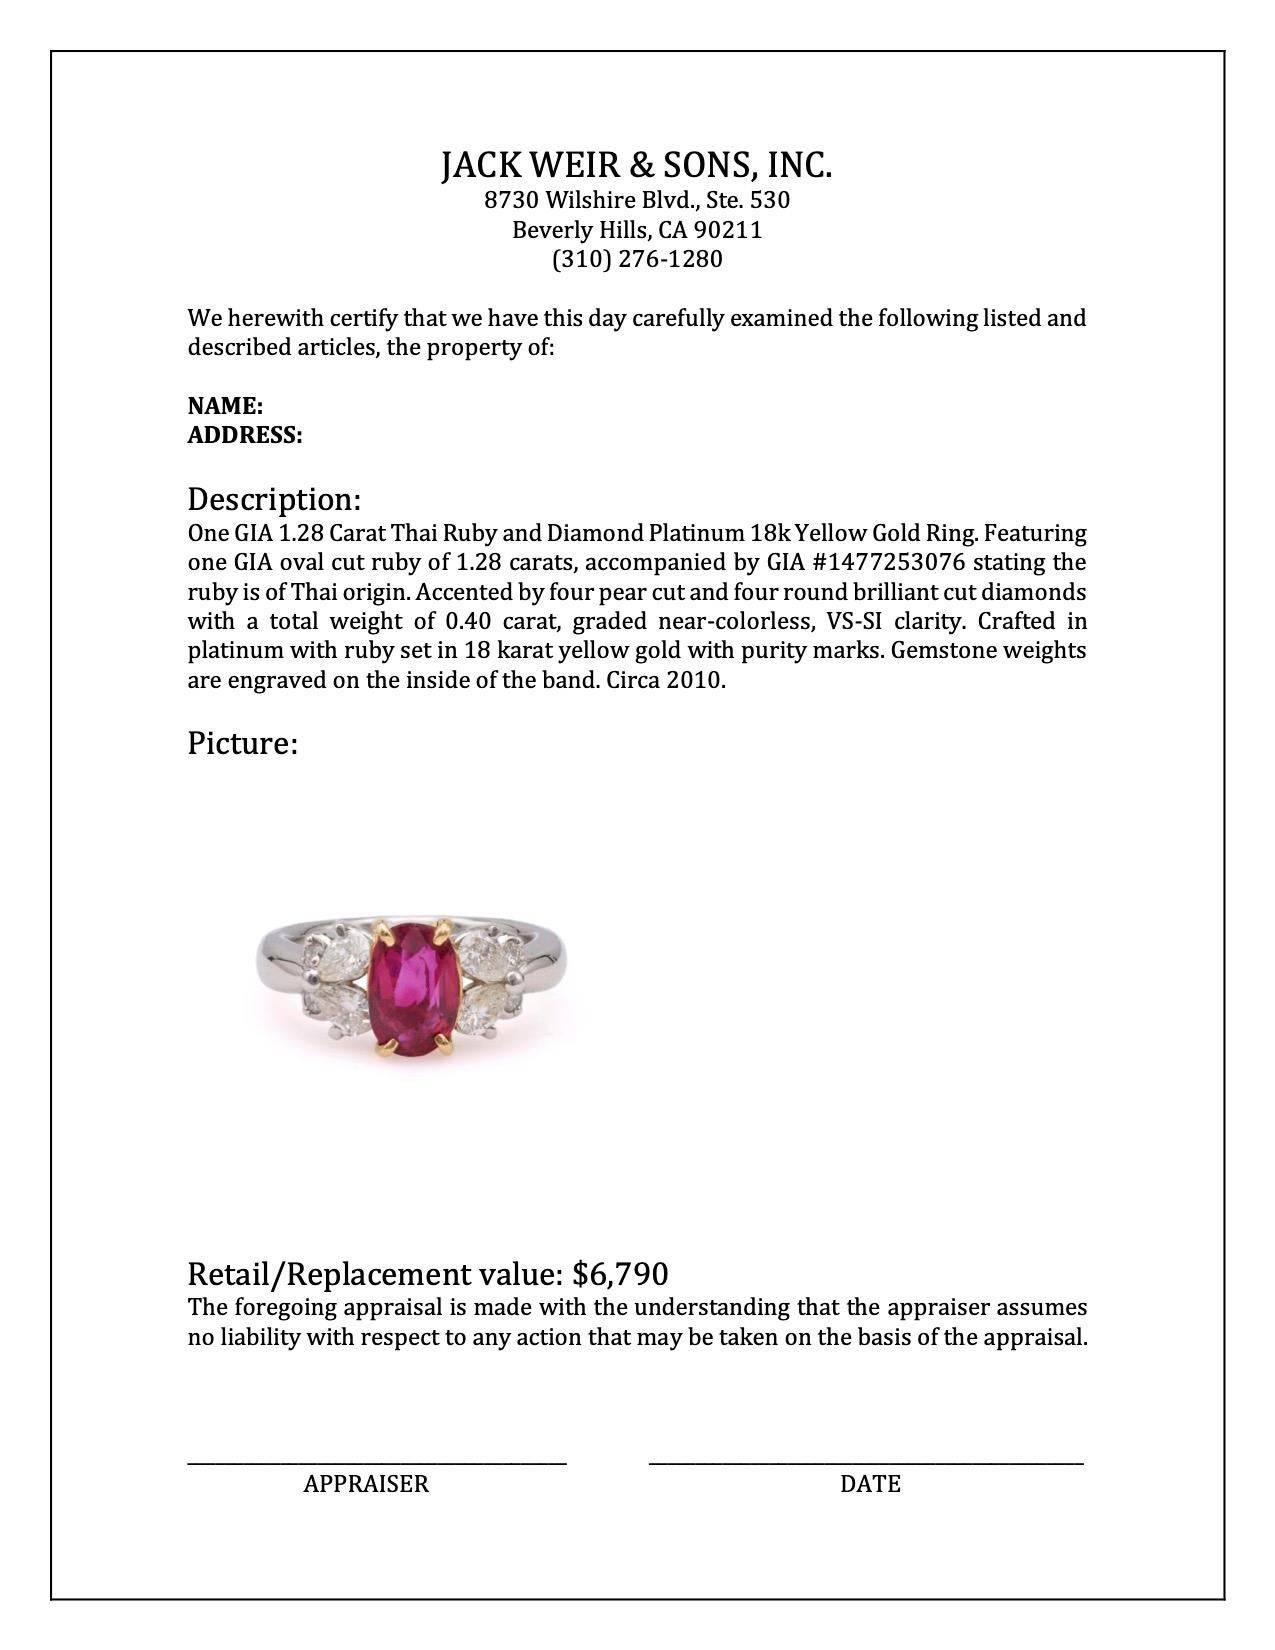 GIA 1.28 Carat Thai Ruby and Diamond Platinum 18k Yellow Gold Ring For Sale 1